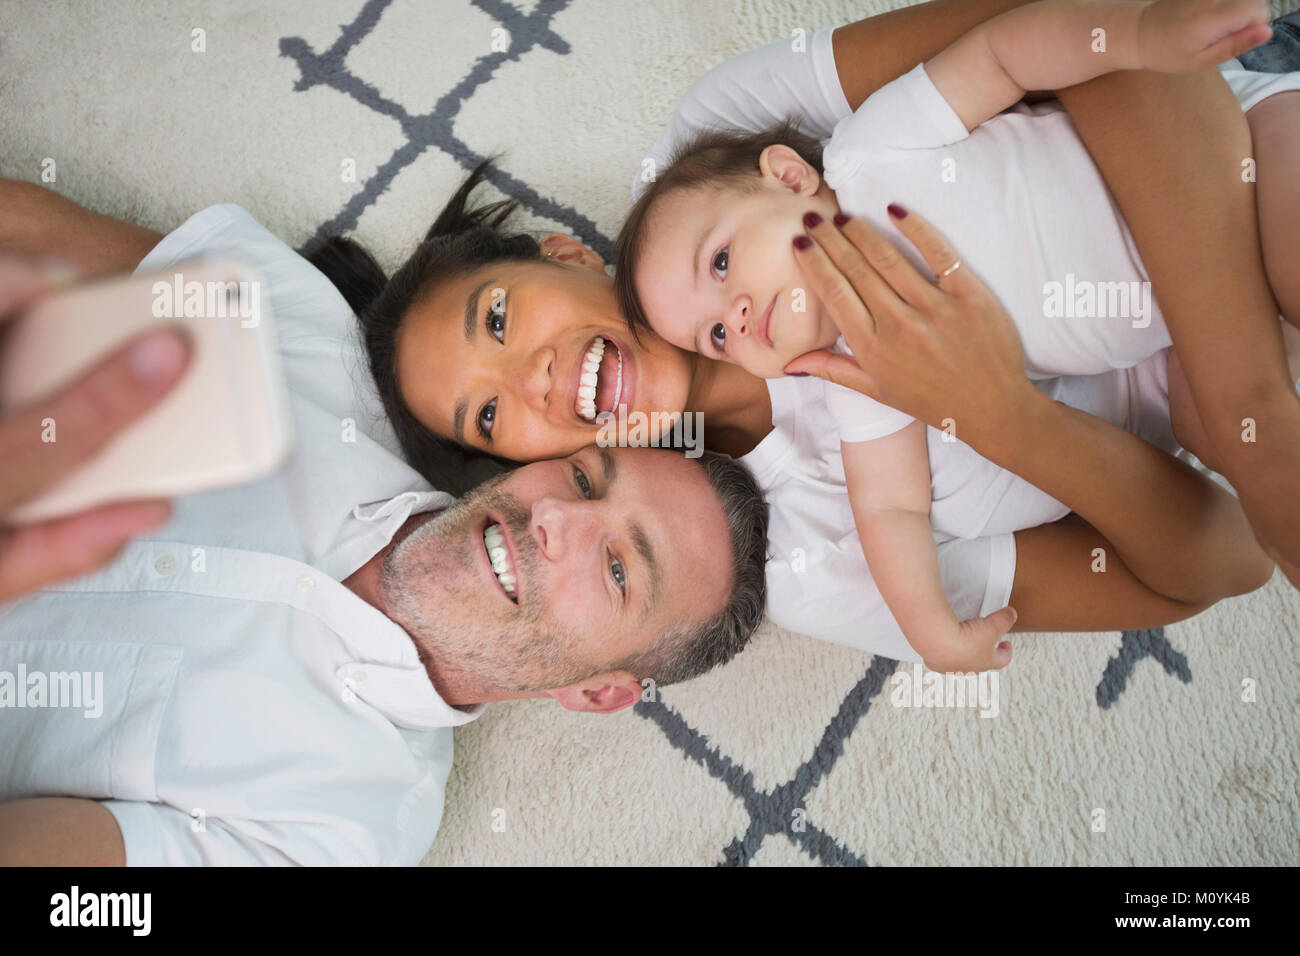 Family laying on floor posing for cell phone selfie Stock Photo